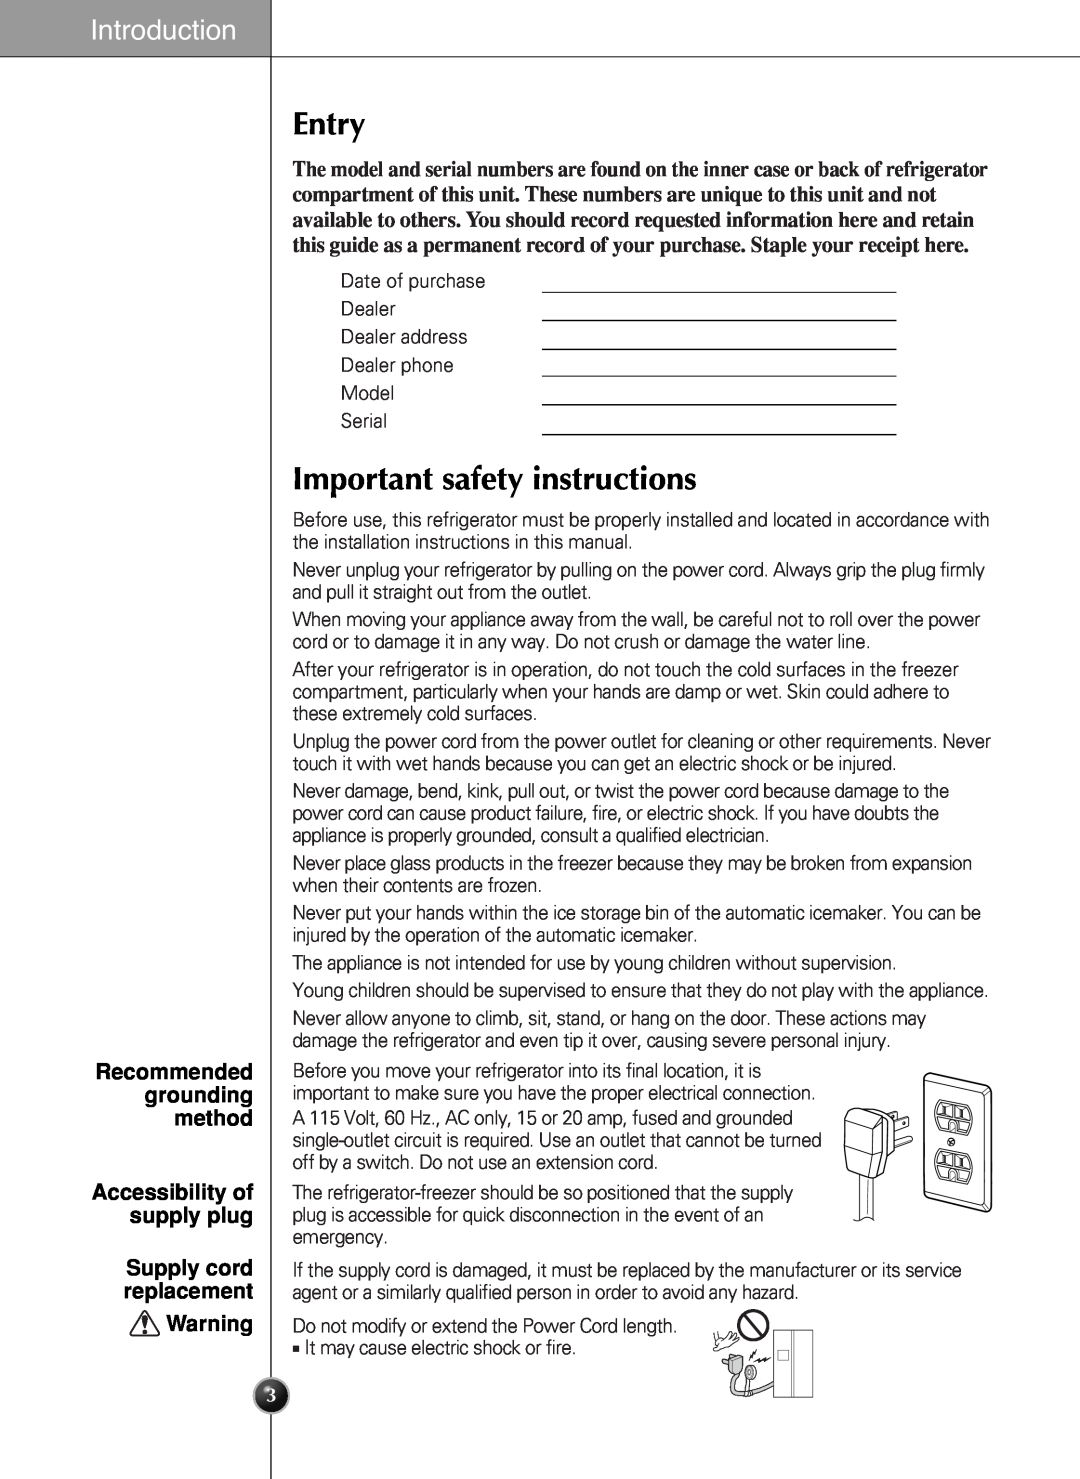 LG Electronics LSC27990TT manual Entry, Important safety instructions, Introduction, Supply cord replacement 